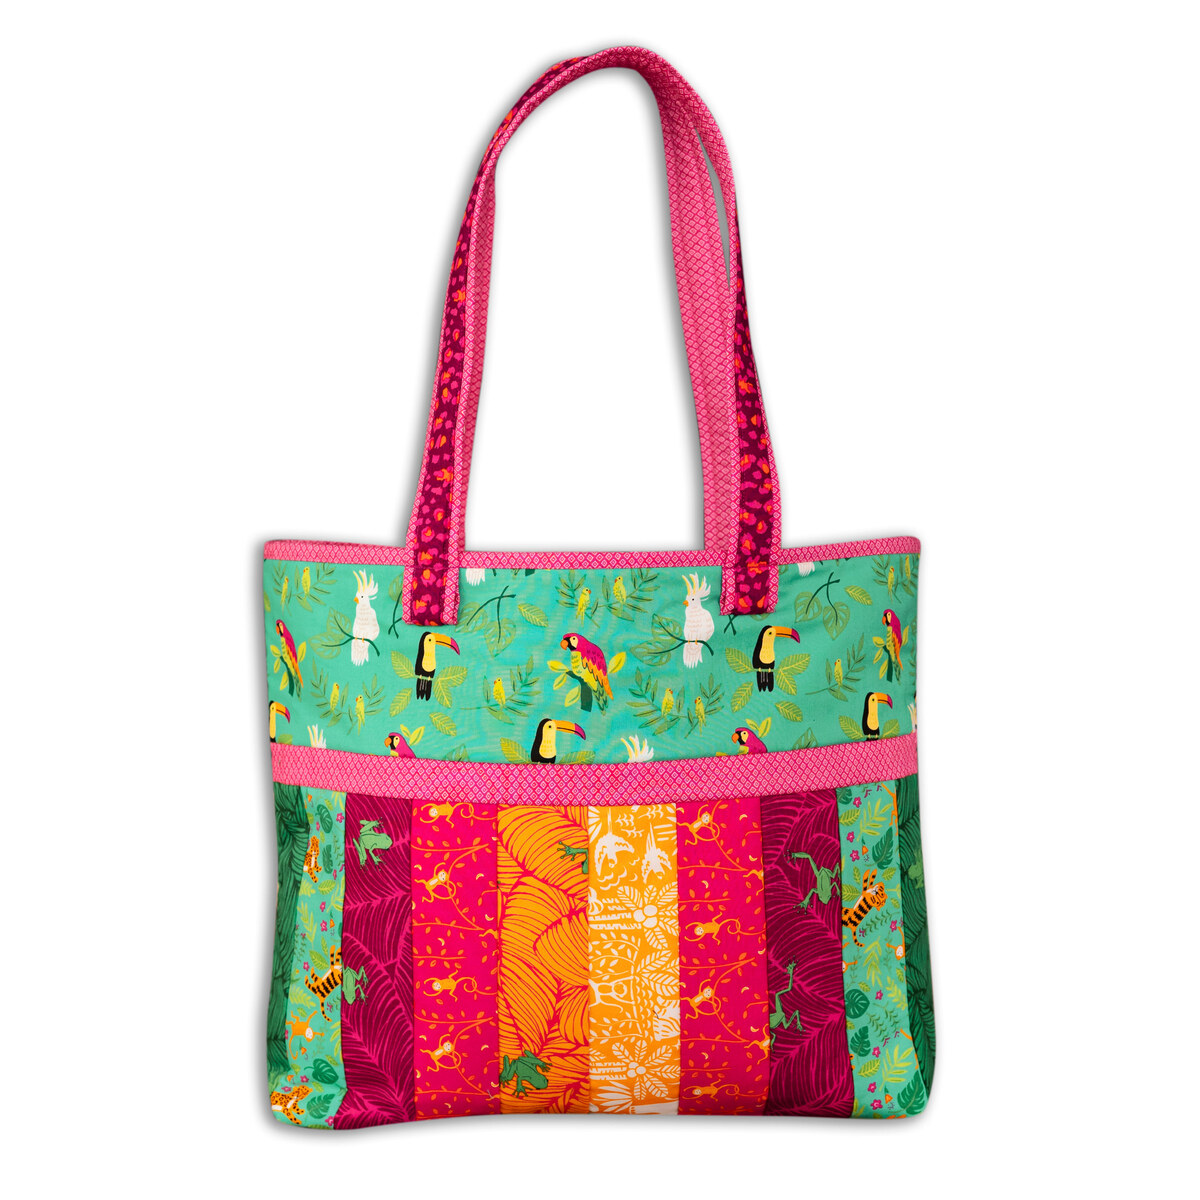 June Tailor, Quilt As You Go, Tote Bag - Sophie